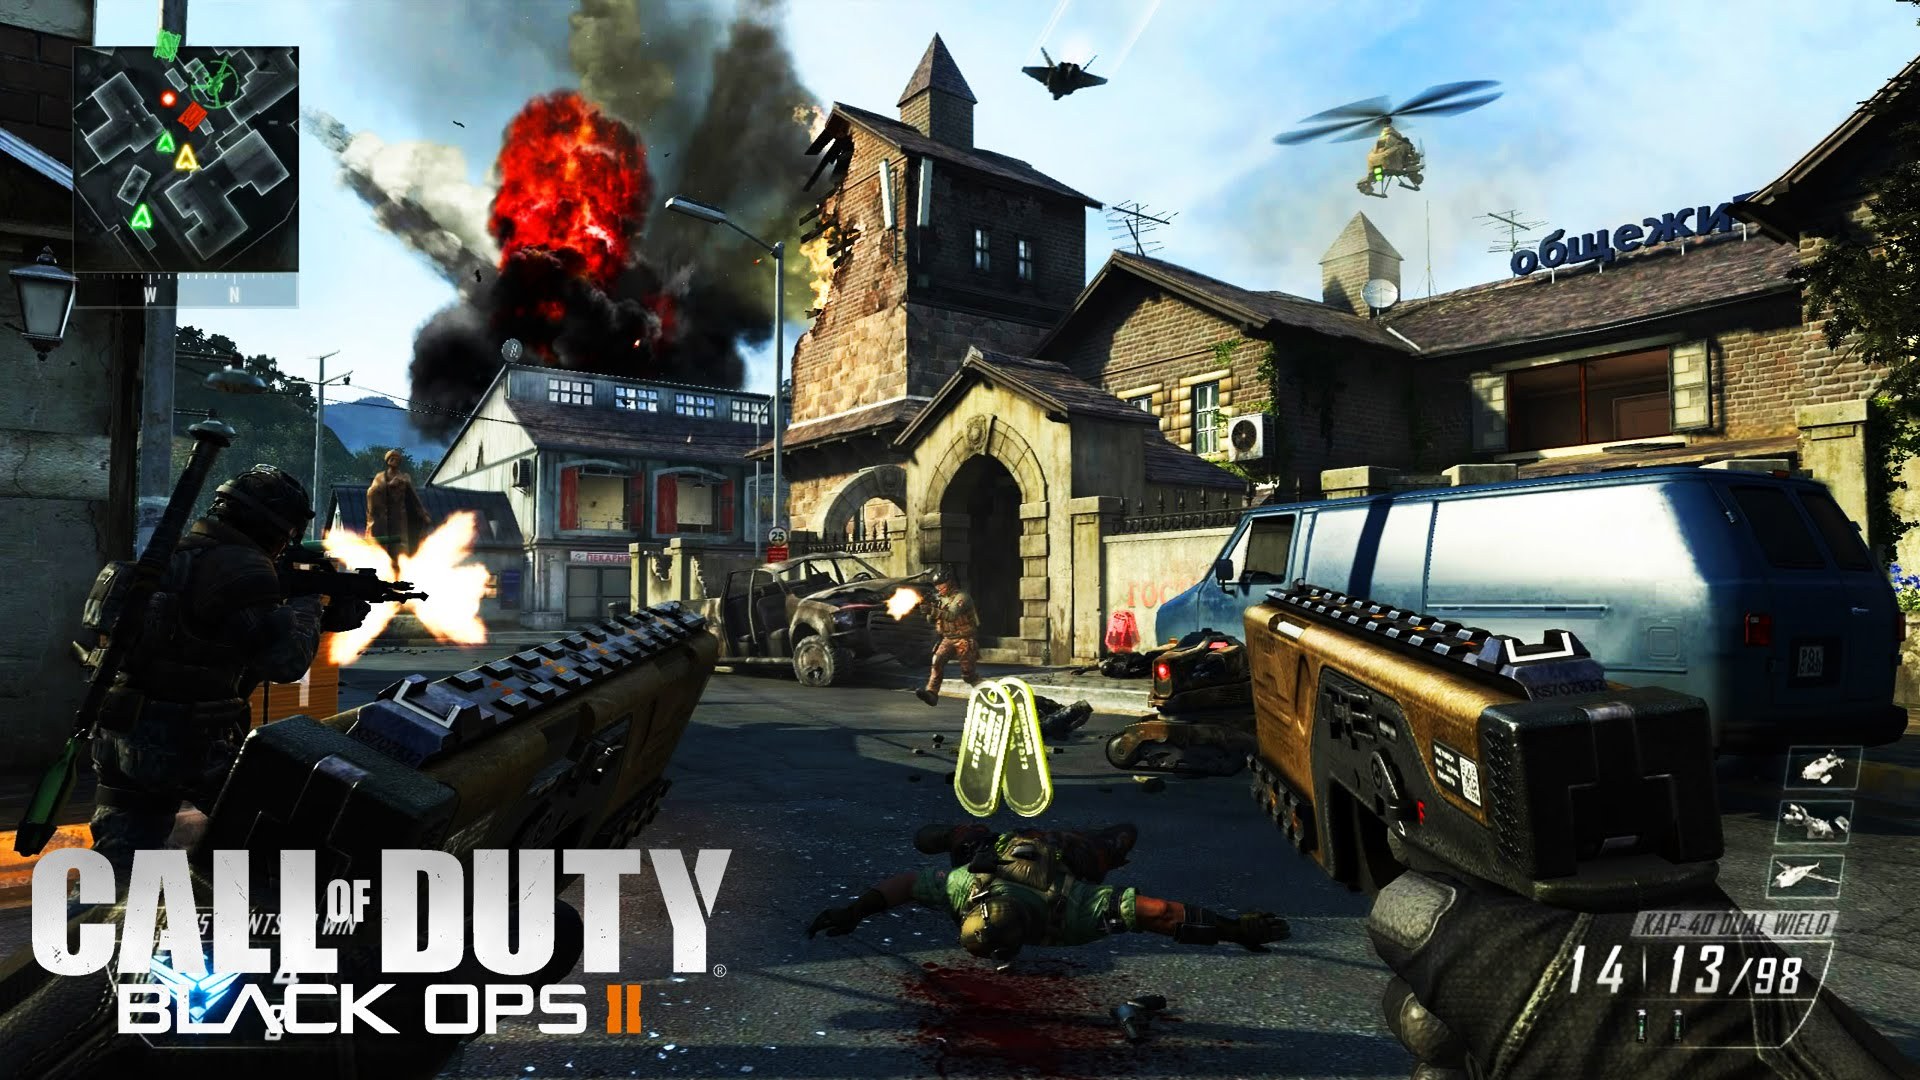 Gameplay's. Call of Duty Black ops 2 геймплей. Call of Duty 12 Black ops 2. Xbox 360 Call of Duty Black ops 2 геймплей. CD Black ops 2.